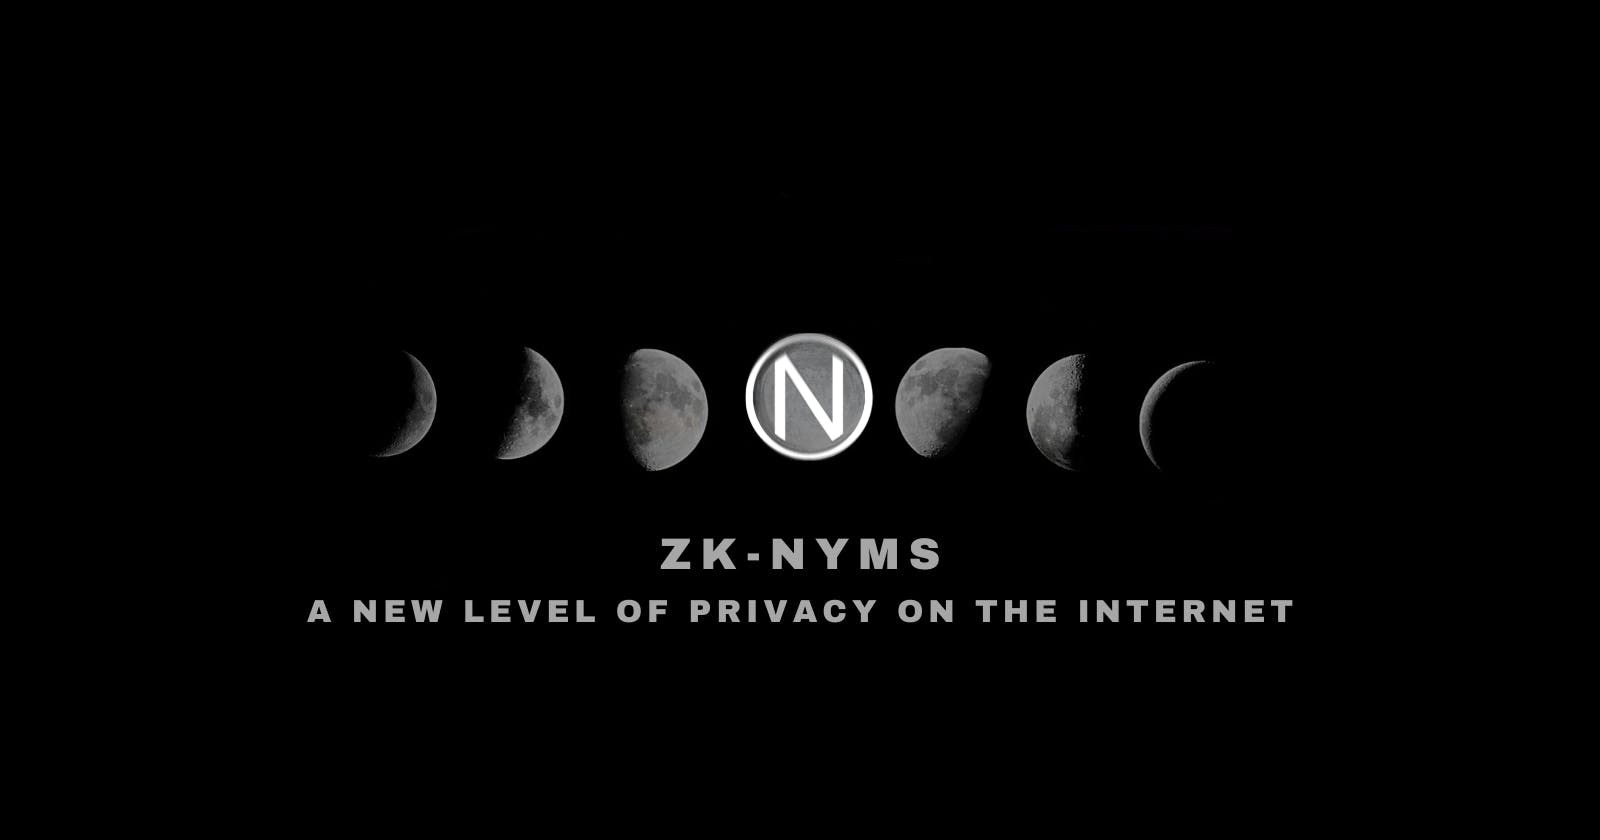 NYM and Zk-nyms: a New Level of Privacy on the Internet